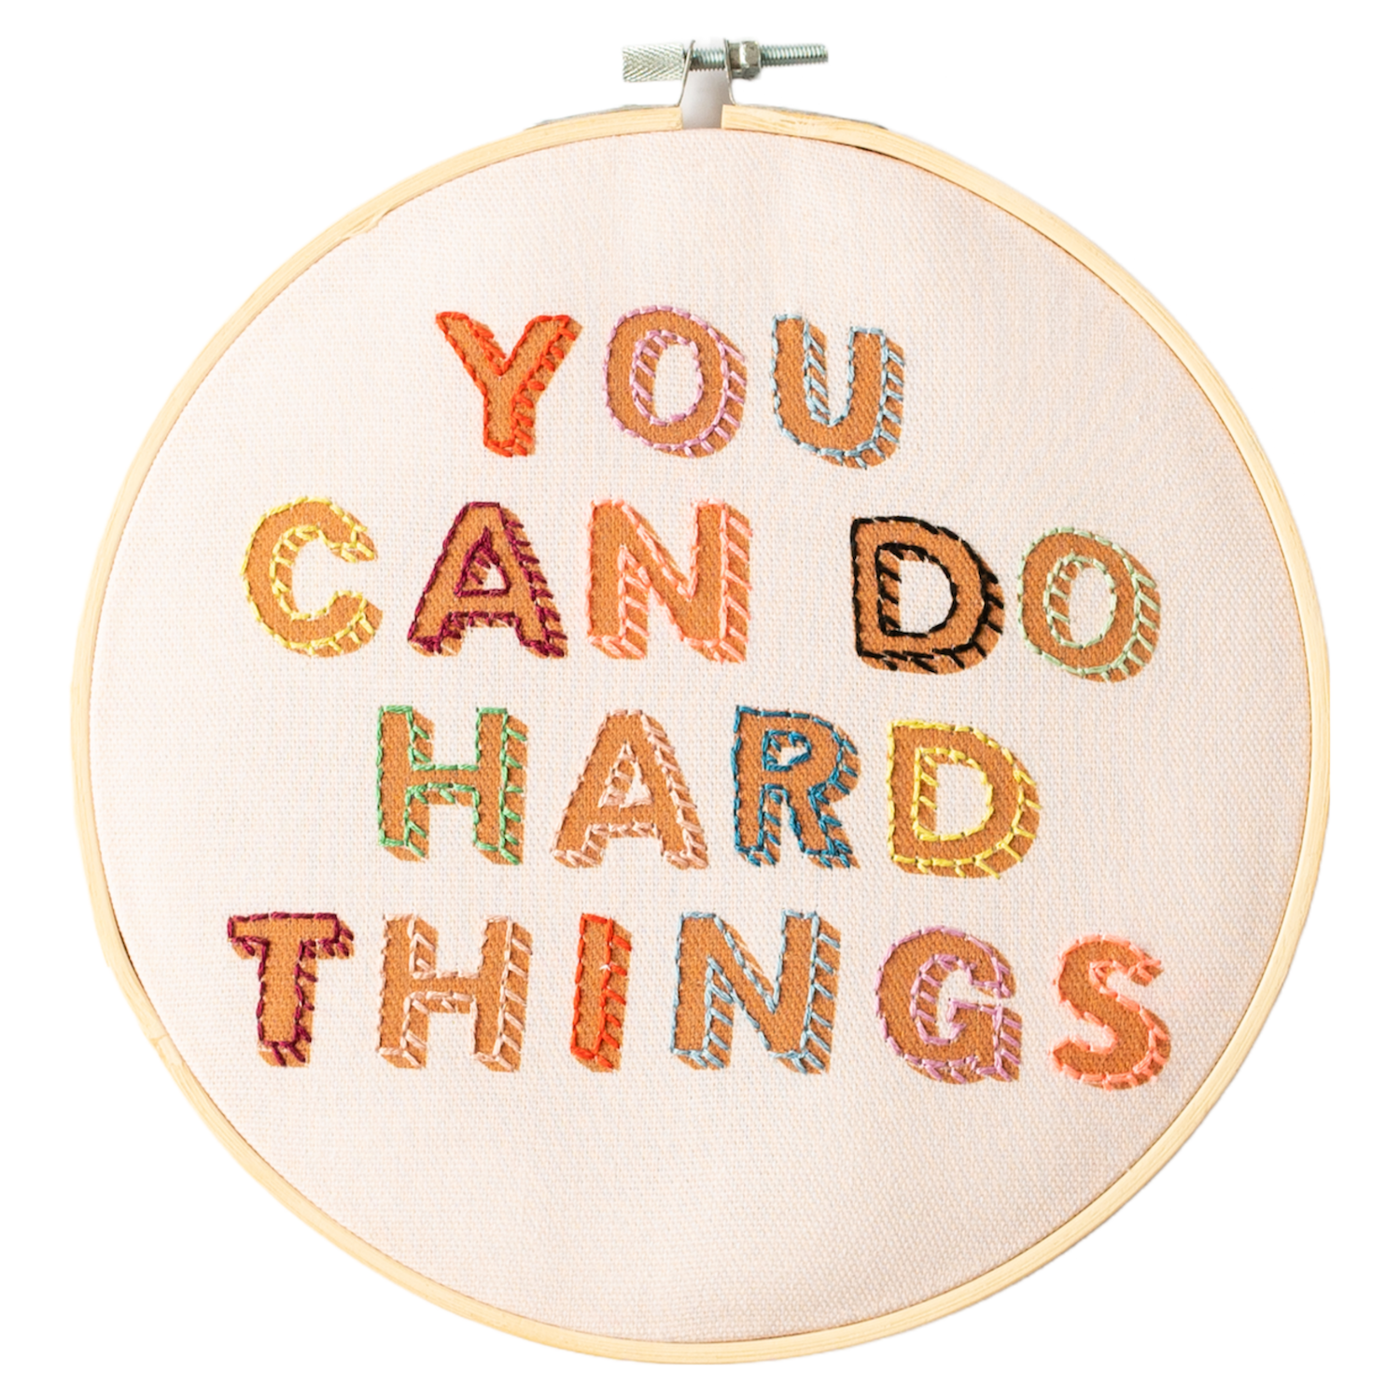 Cotton Clara - You Can Do Hard Things Embroidery Hoop Kit